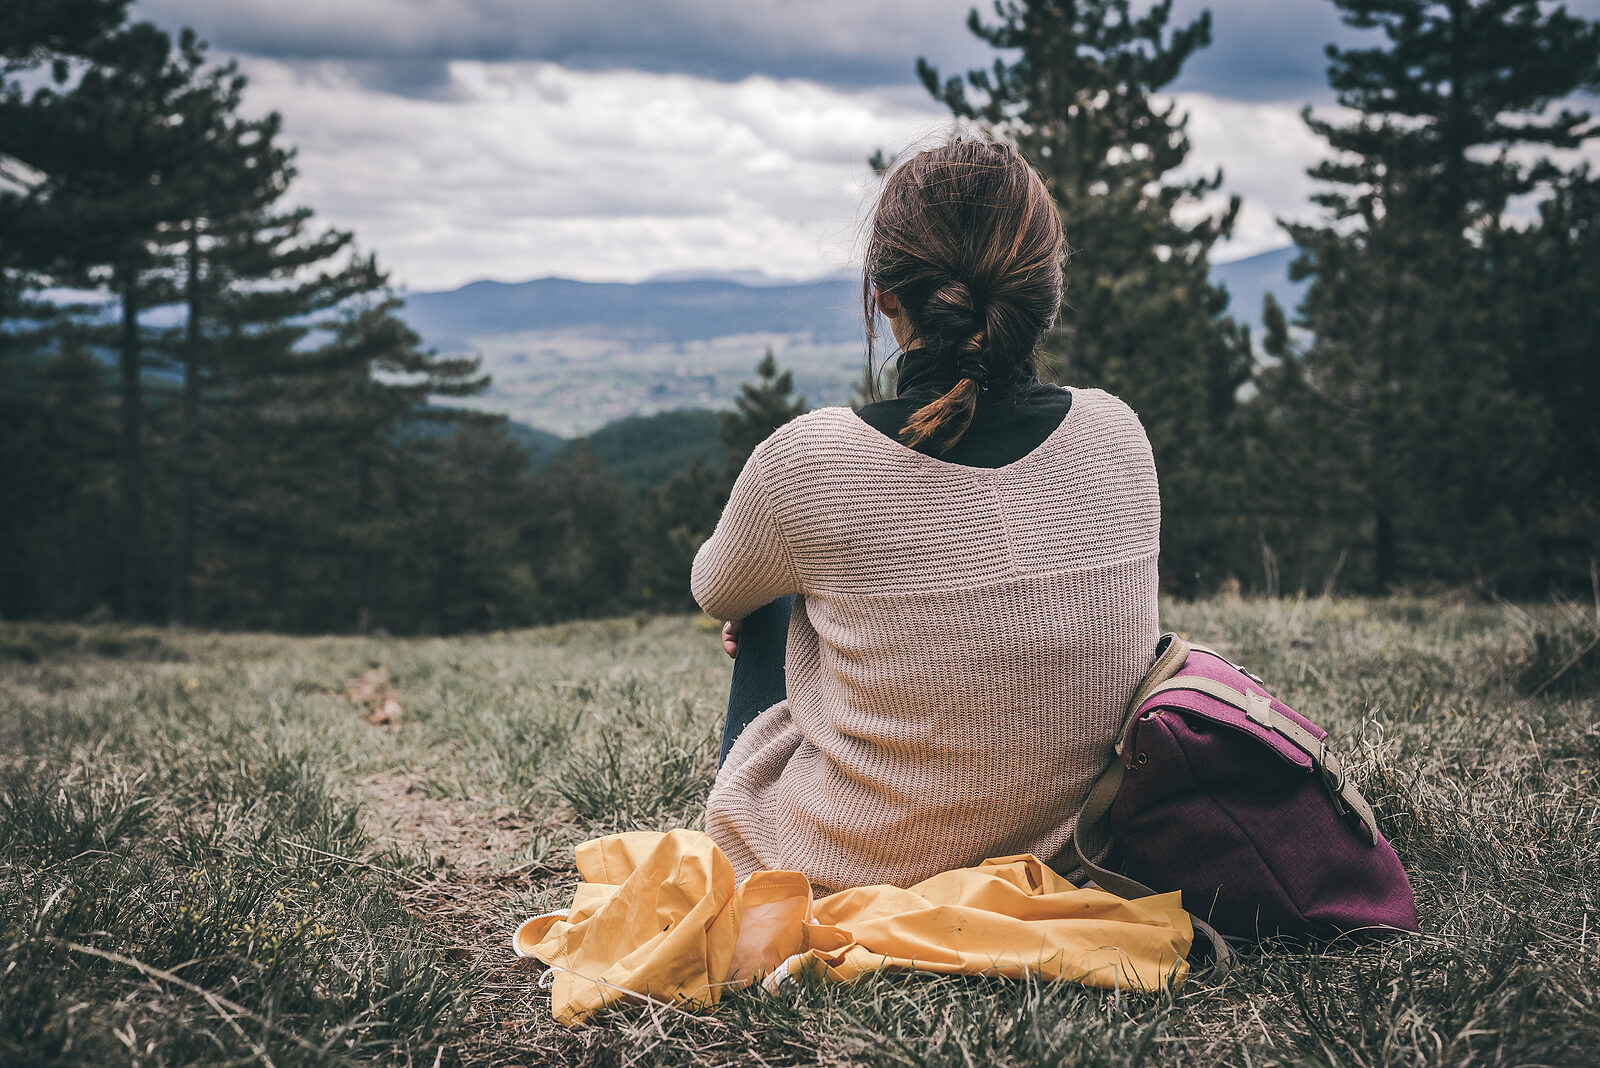 Image of a woman sitting on the ground on a cloudy day looking out at mountains. If you struggle with depression, learn how EMDR therapy in Las Vegas, NV can help you cope with your symptoms in healthy ways.